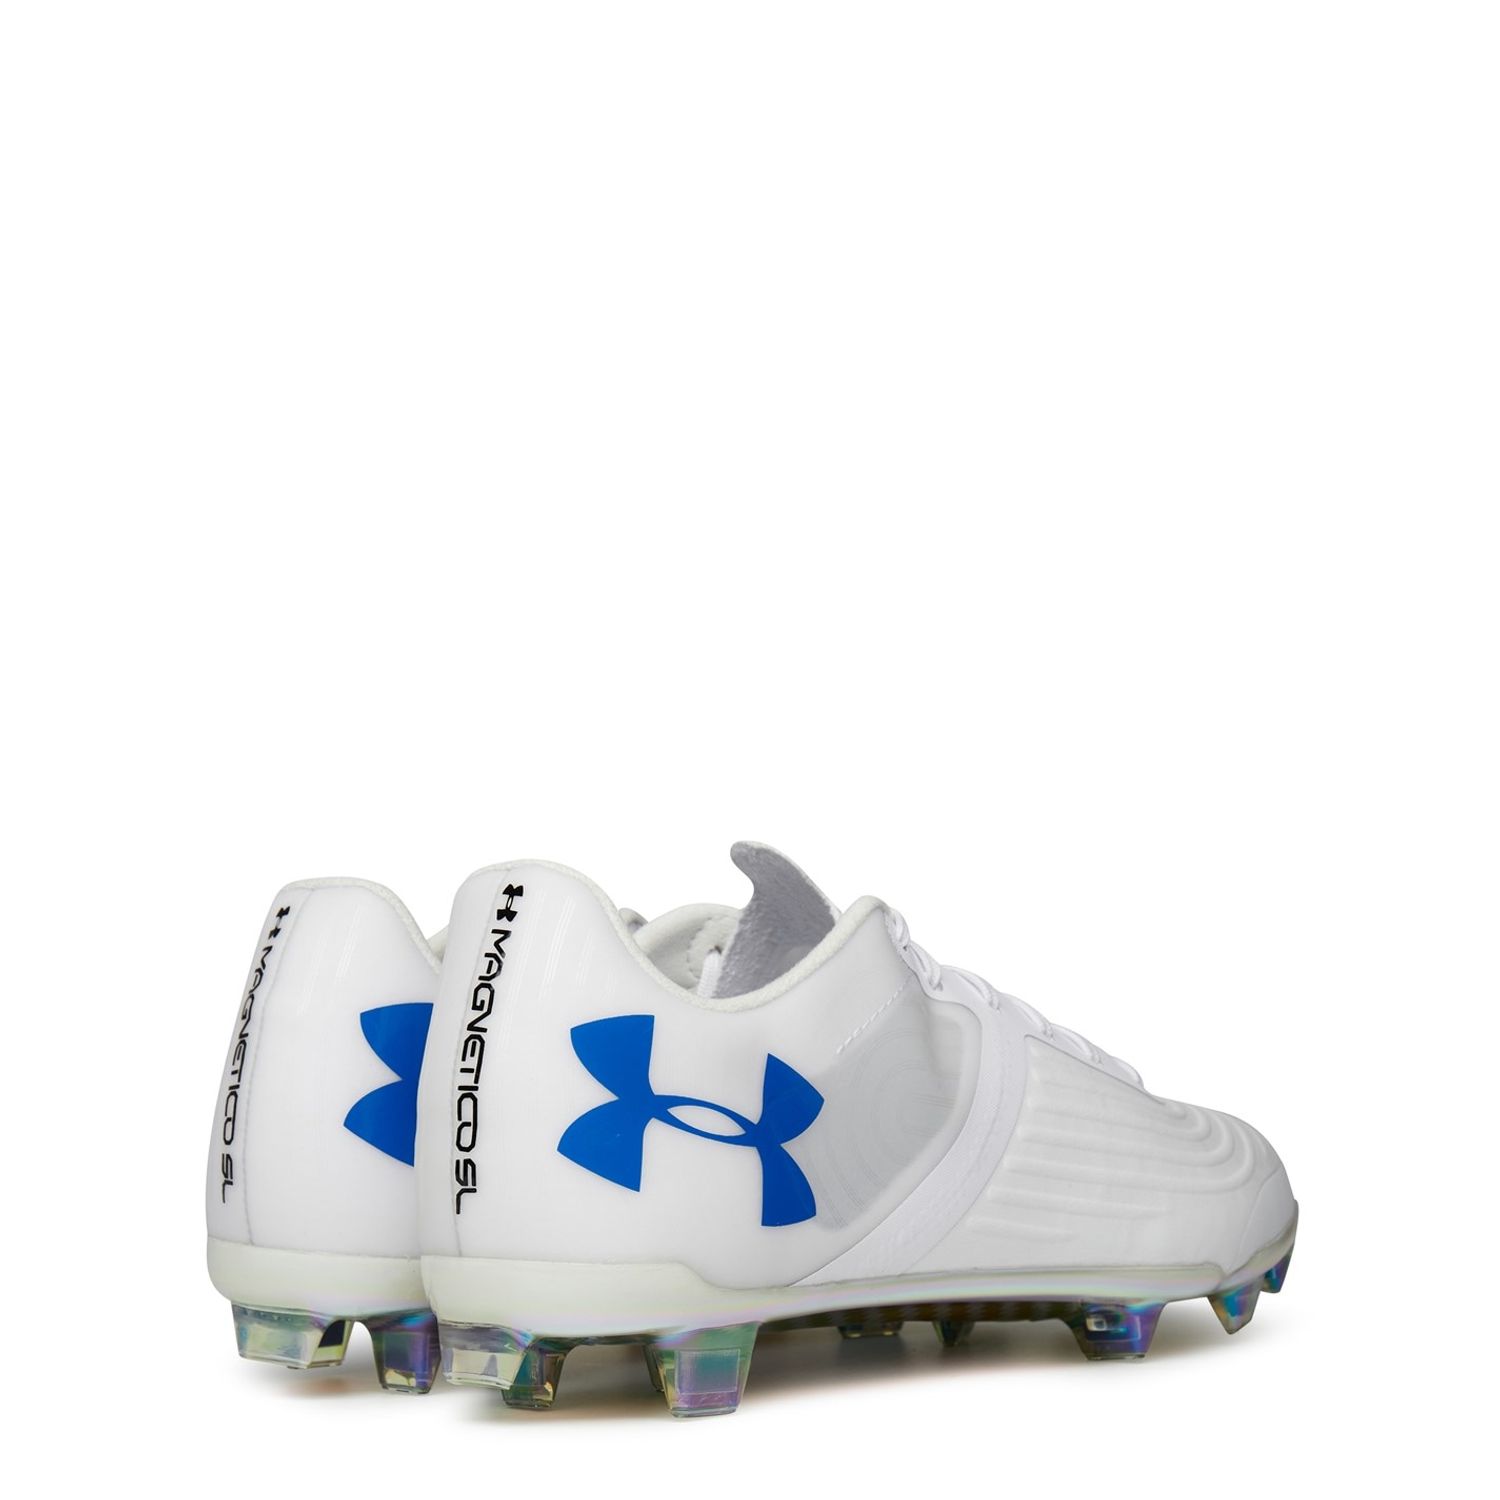 Under Armour Men's Magnetico Elite 3 Firm Ground Soccer Cleats